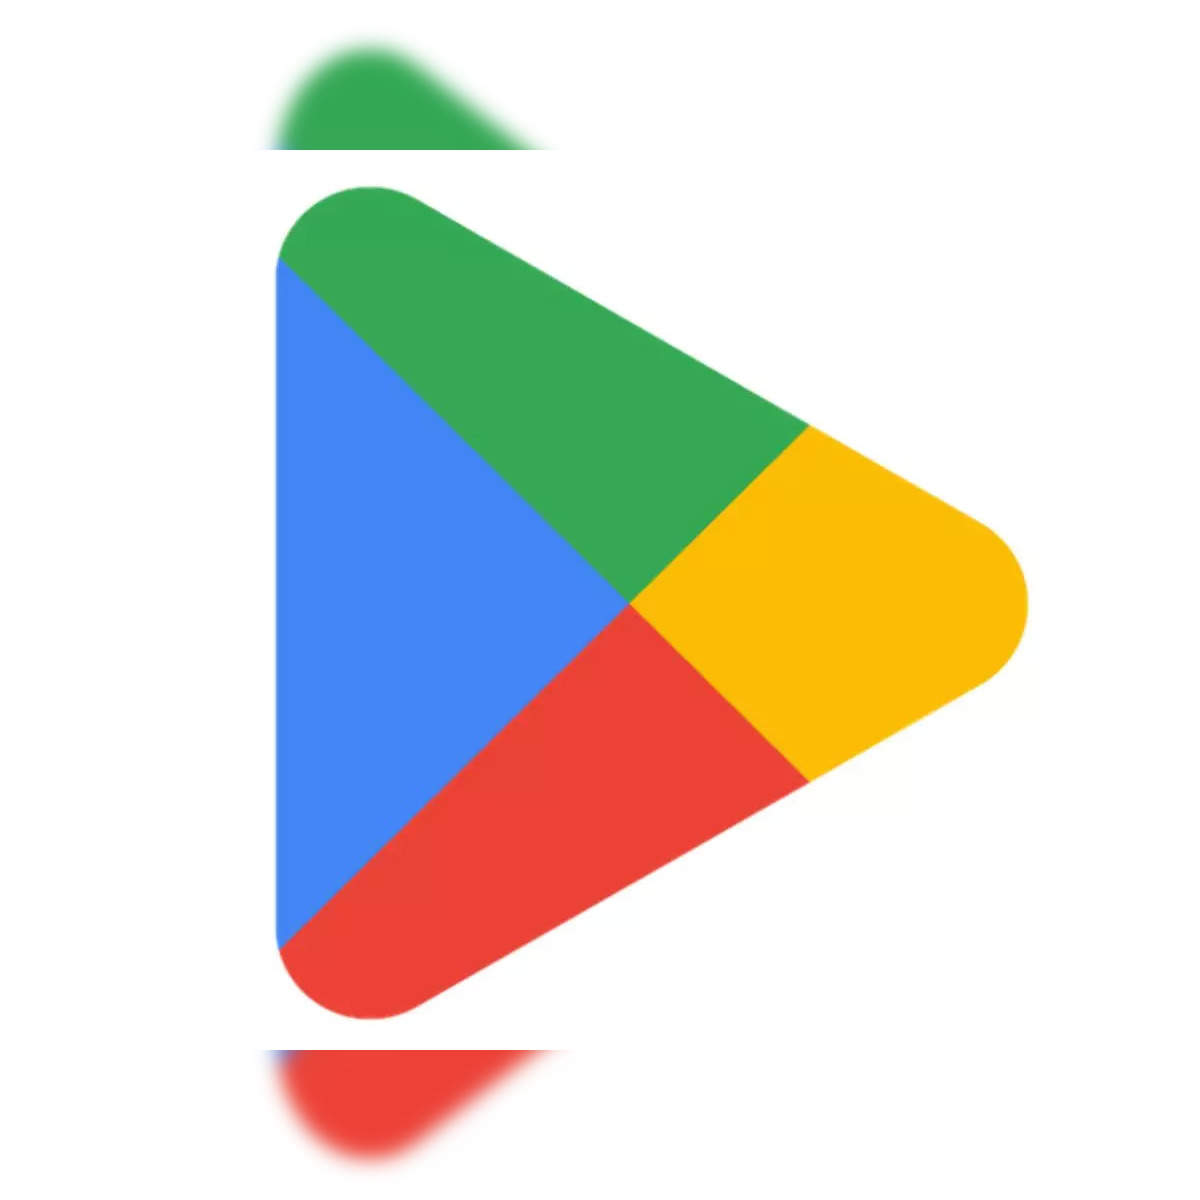 Granny's House - Apps on Google Play